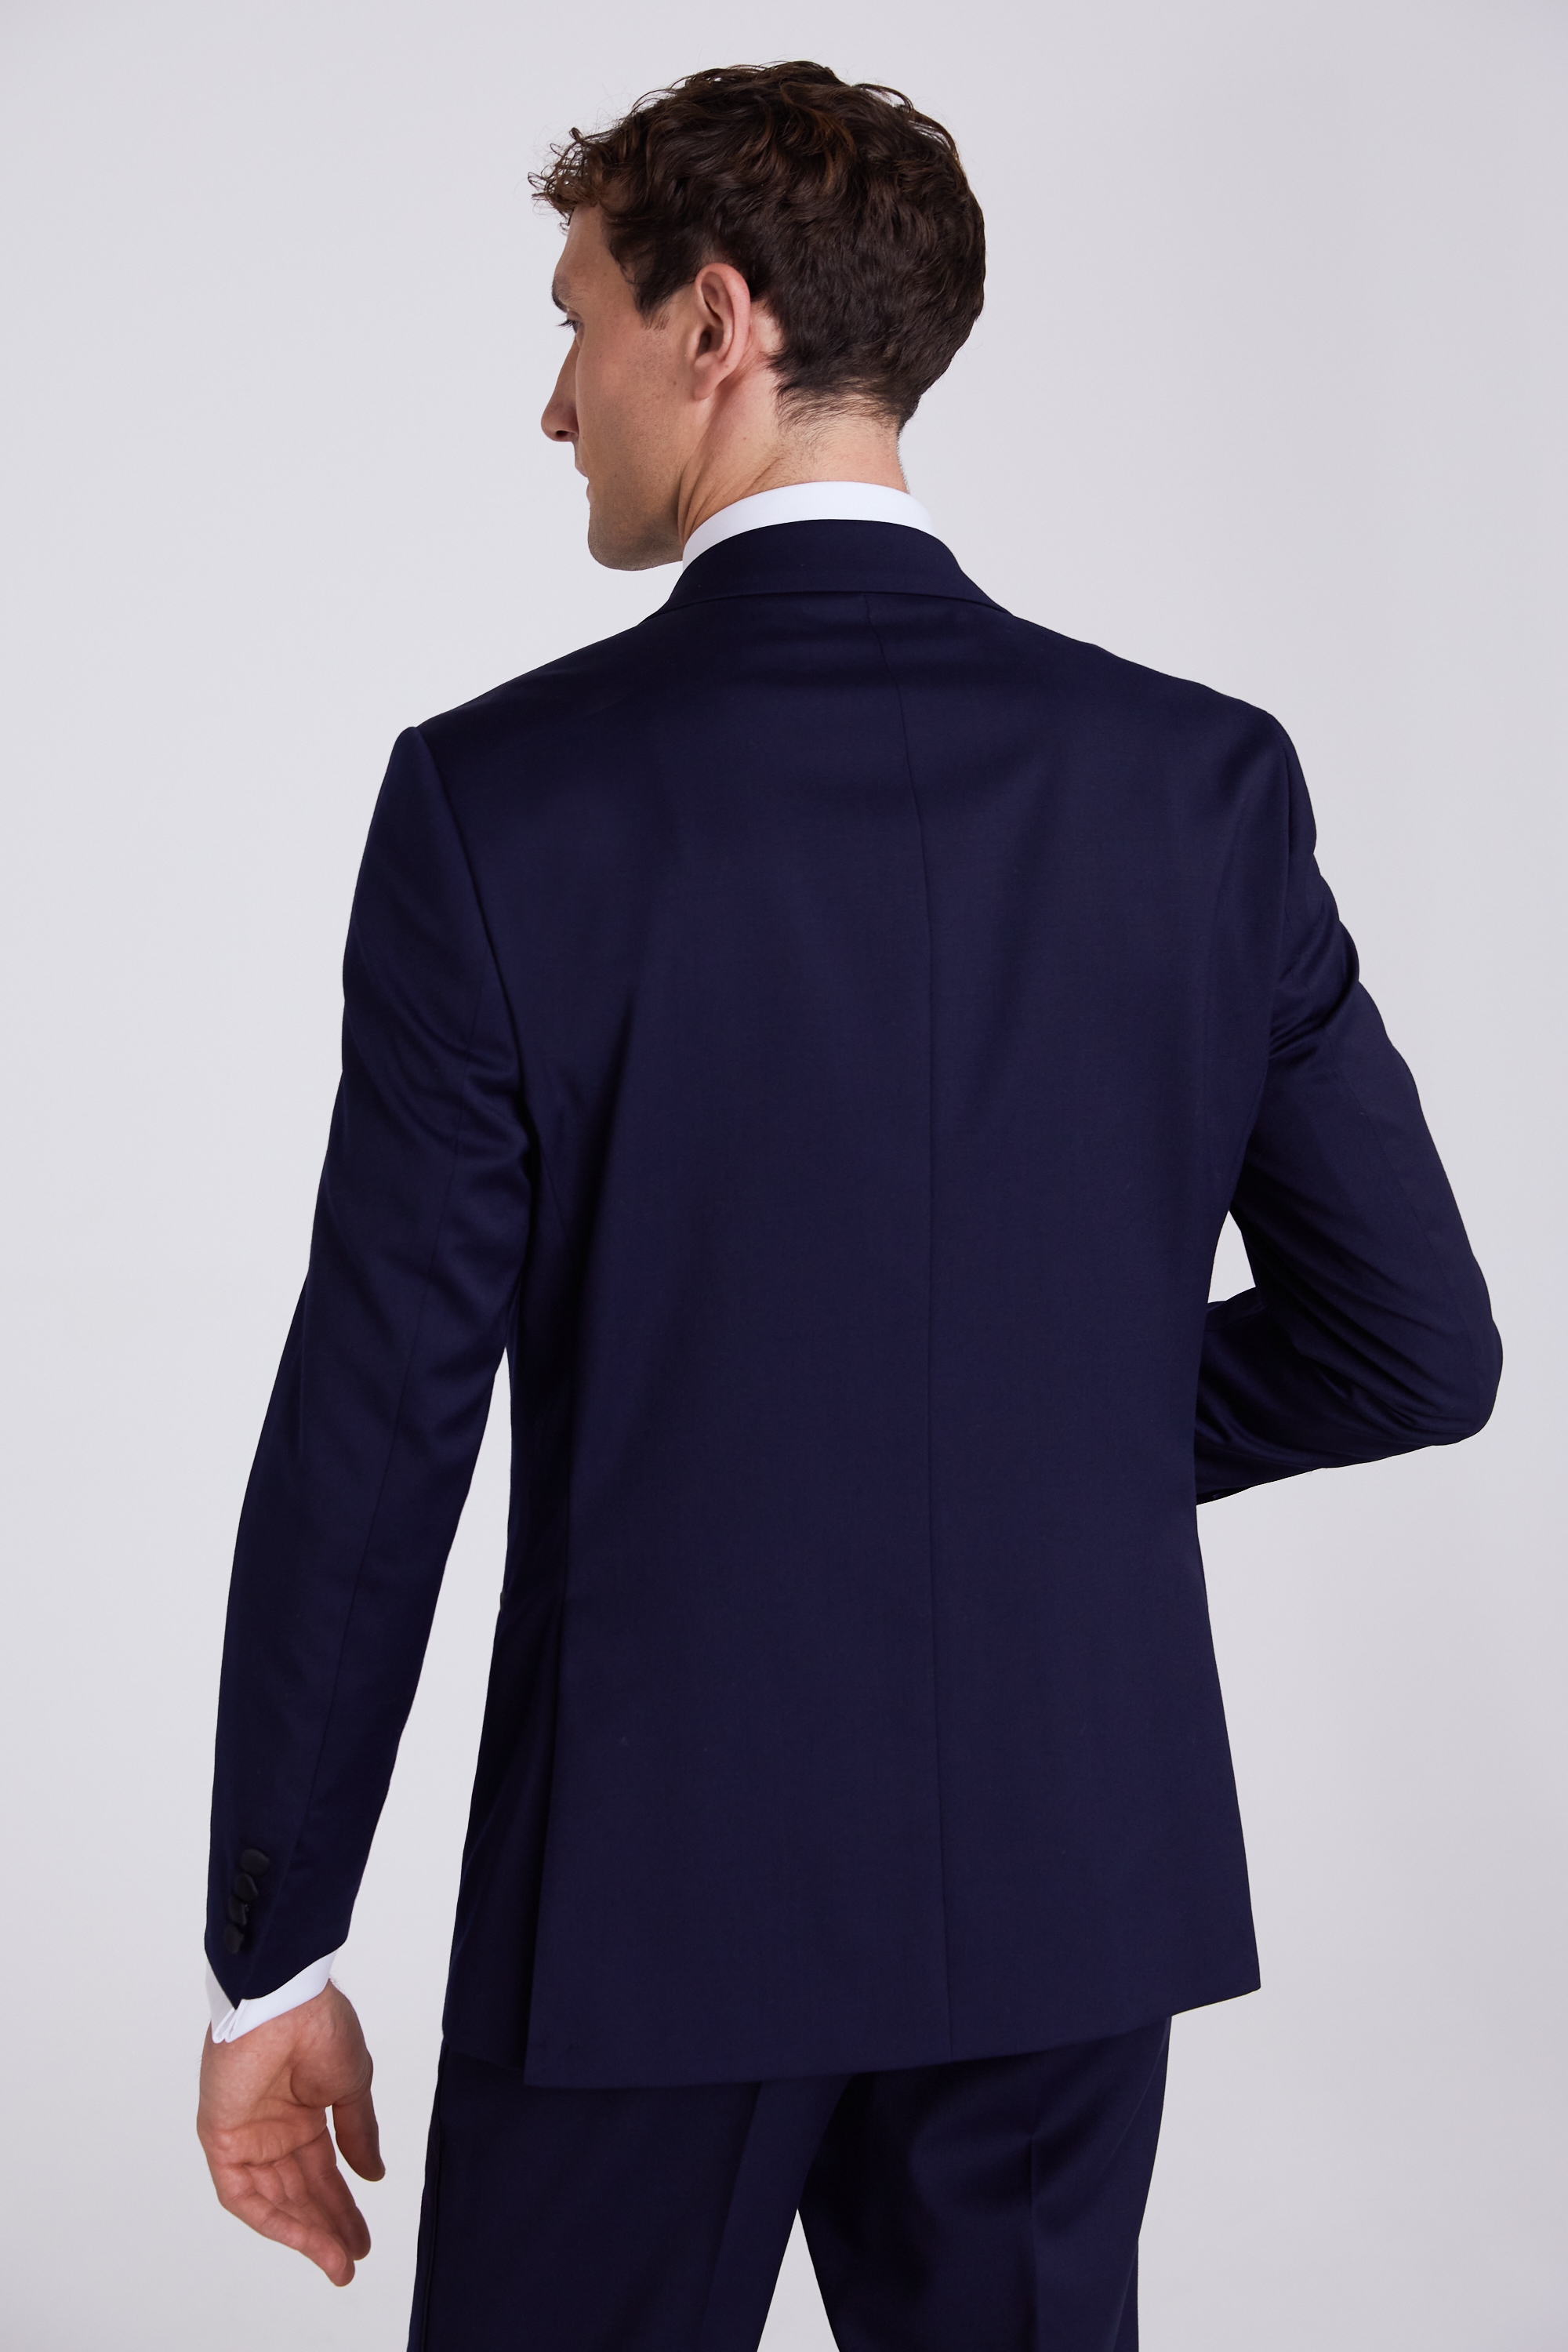 Tailored Fit Navy Twill Tuxedo Jacket | Buy Online at Moss